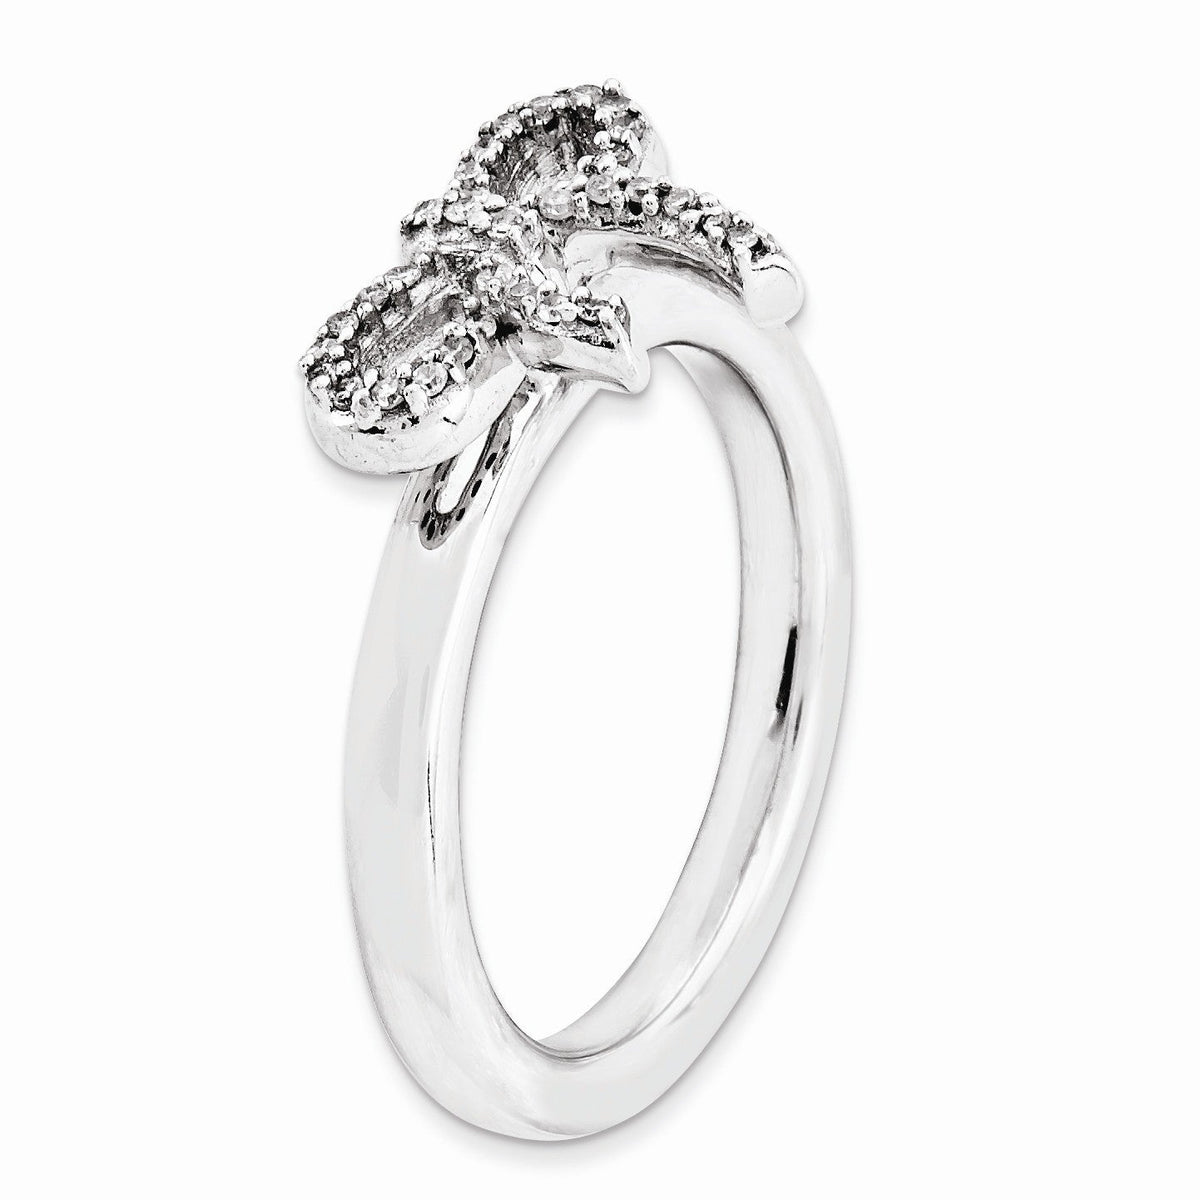 Alternate view of the Sterling Silver Stackable 1/10 Ctw HI/I3 Diamond Bow Ring by The Black Bow Jewelry Co.